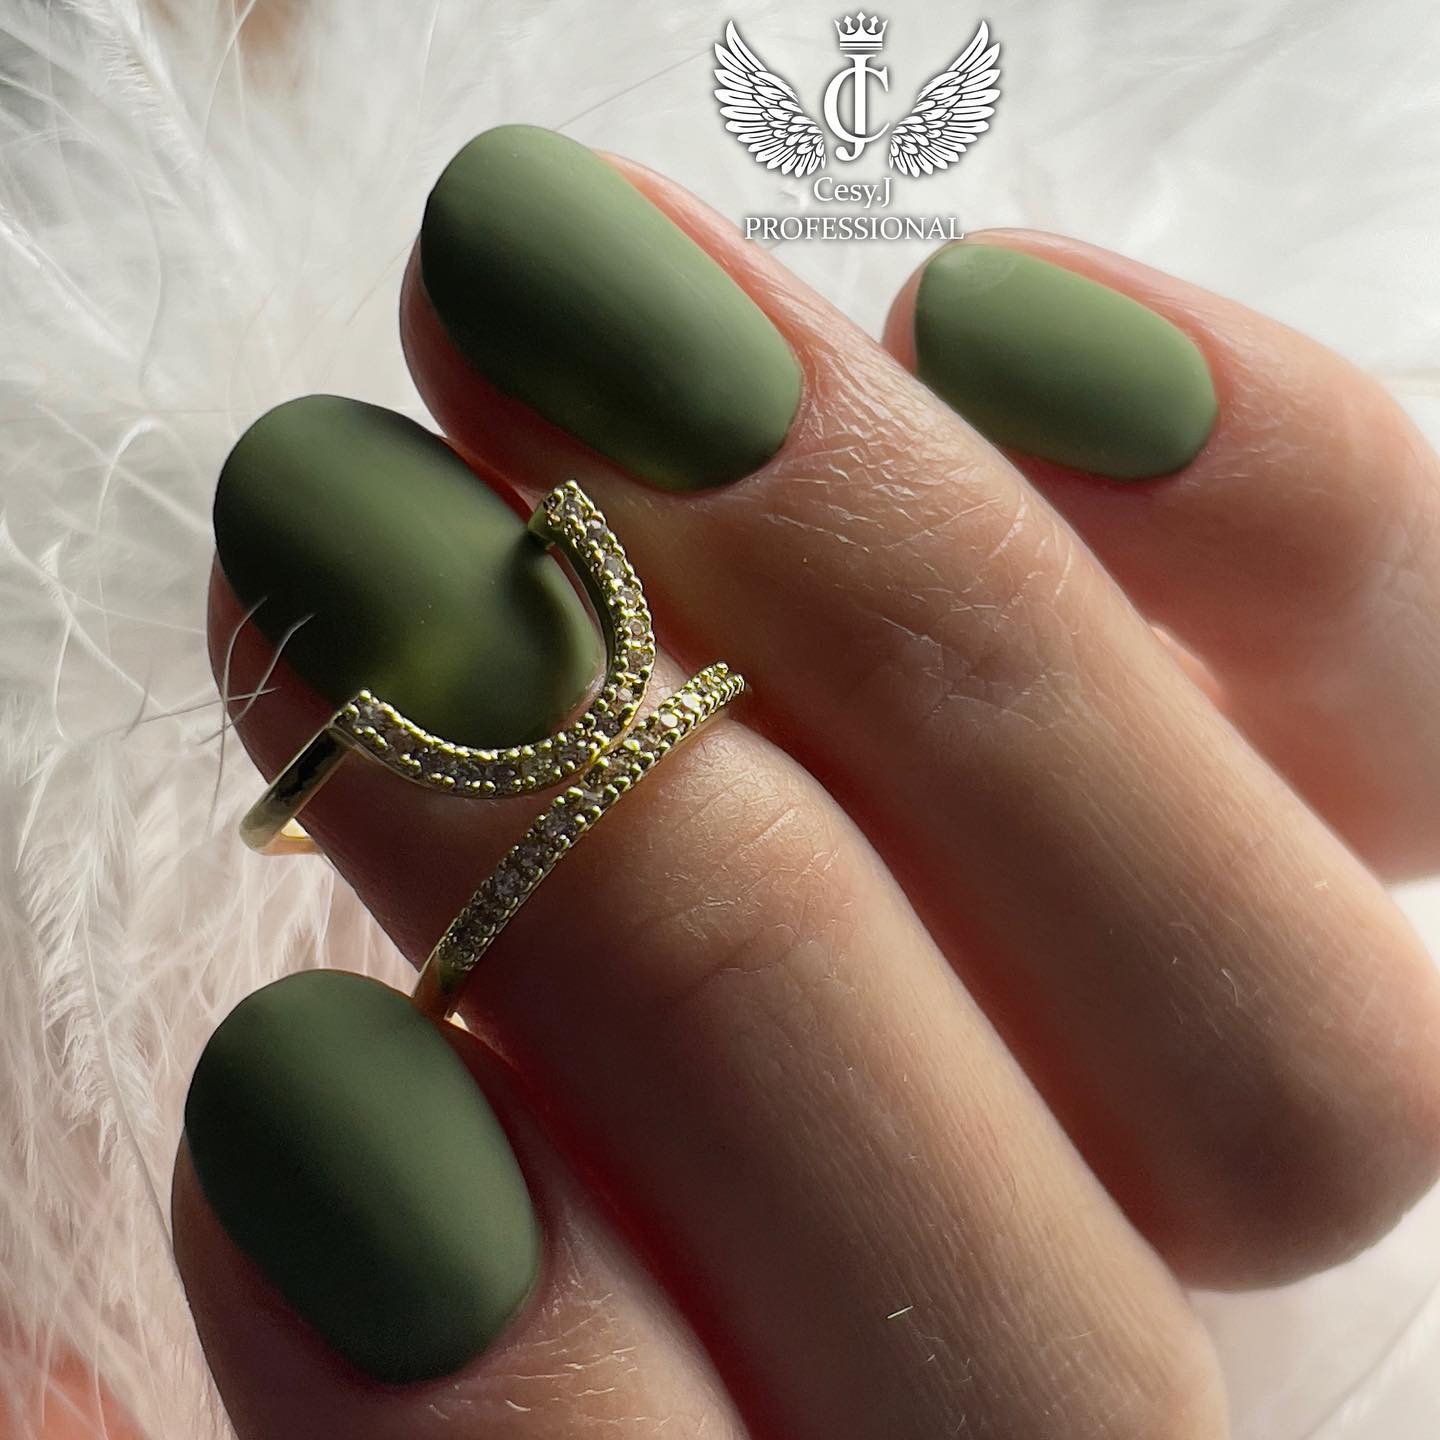 Best Green Nail Polish (Our Top 5) – ORLY